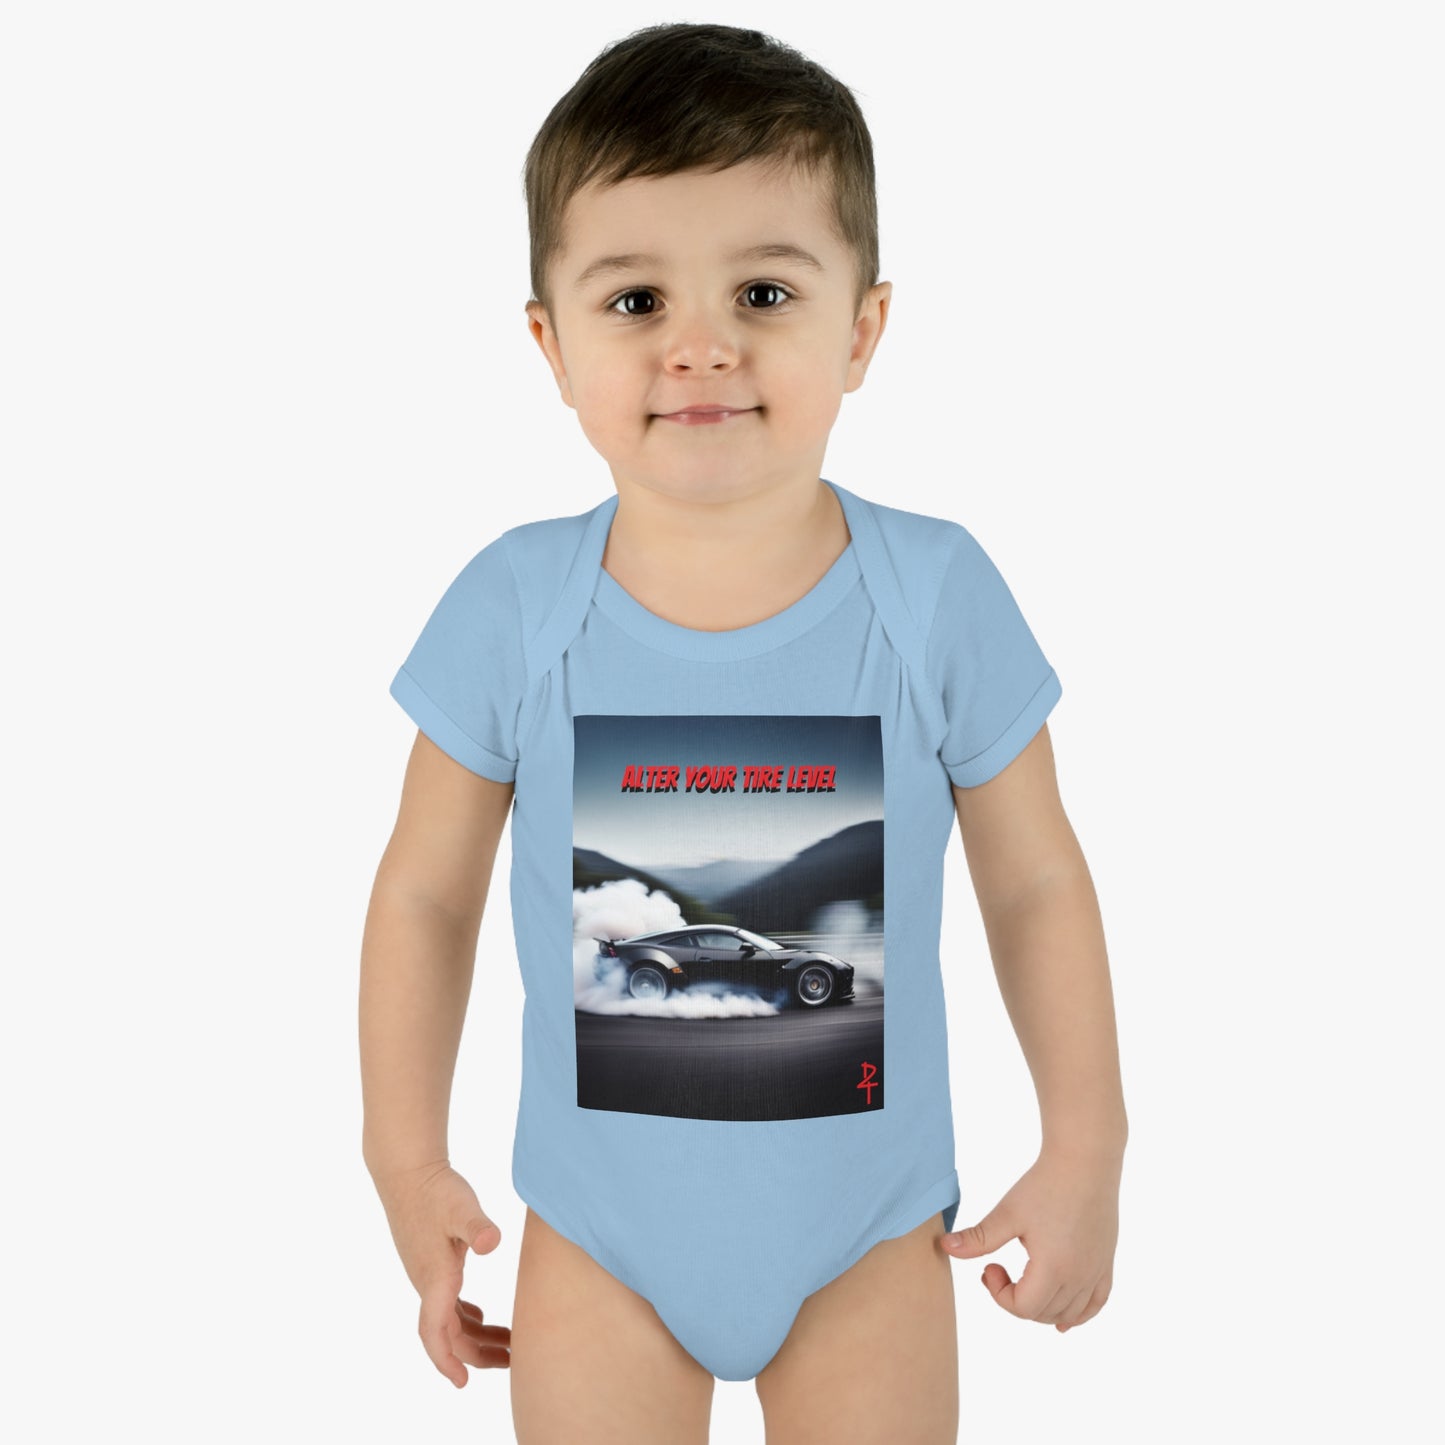 ALTER YOUR TIRE LEVEL INFANT BODY SUIT